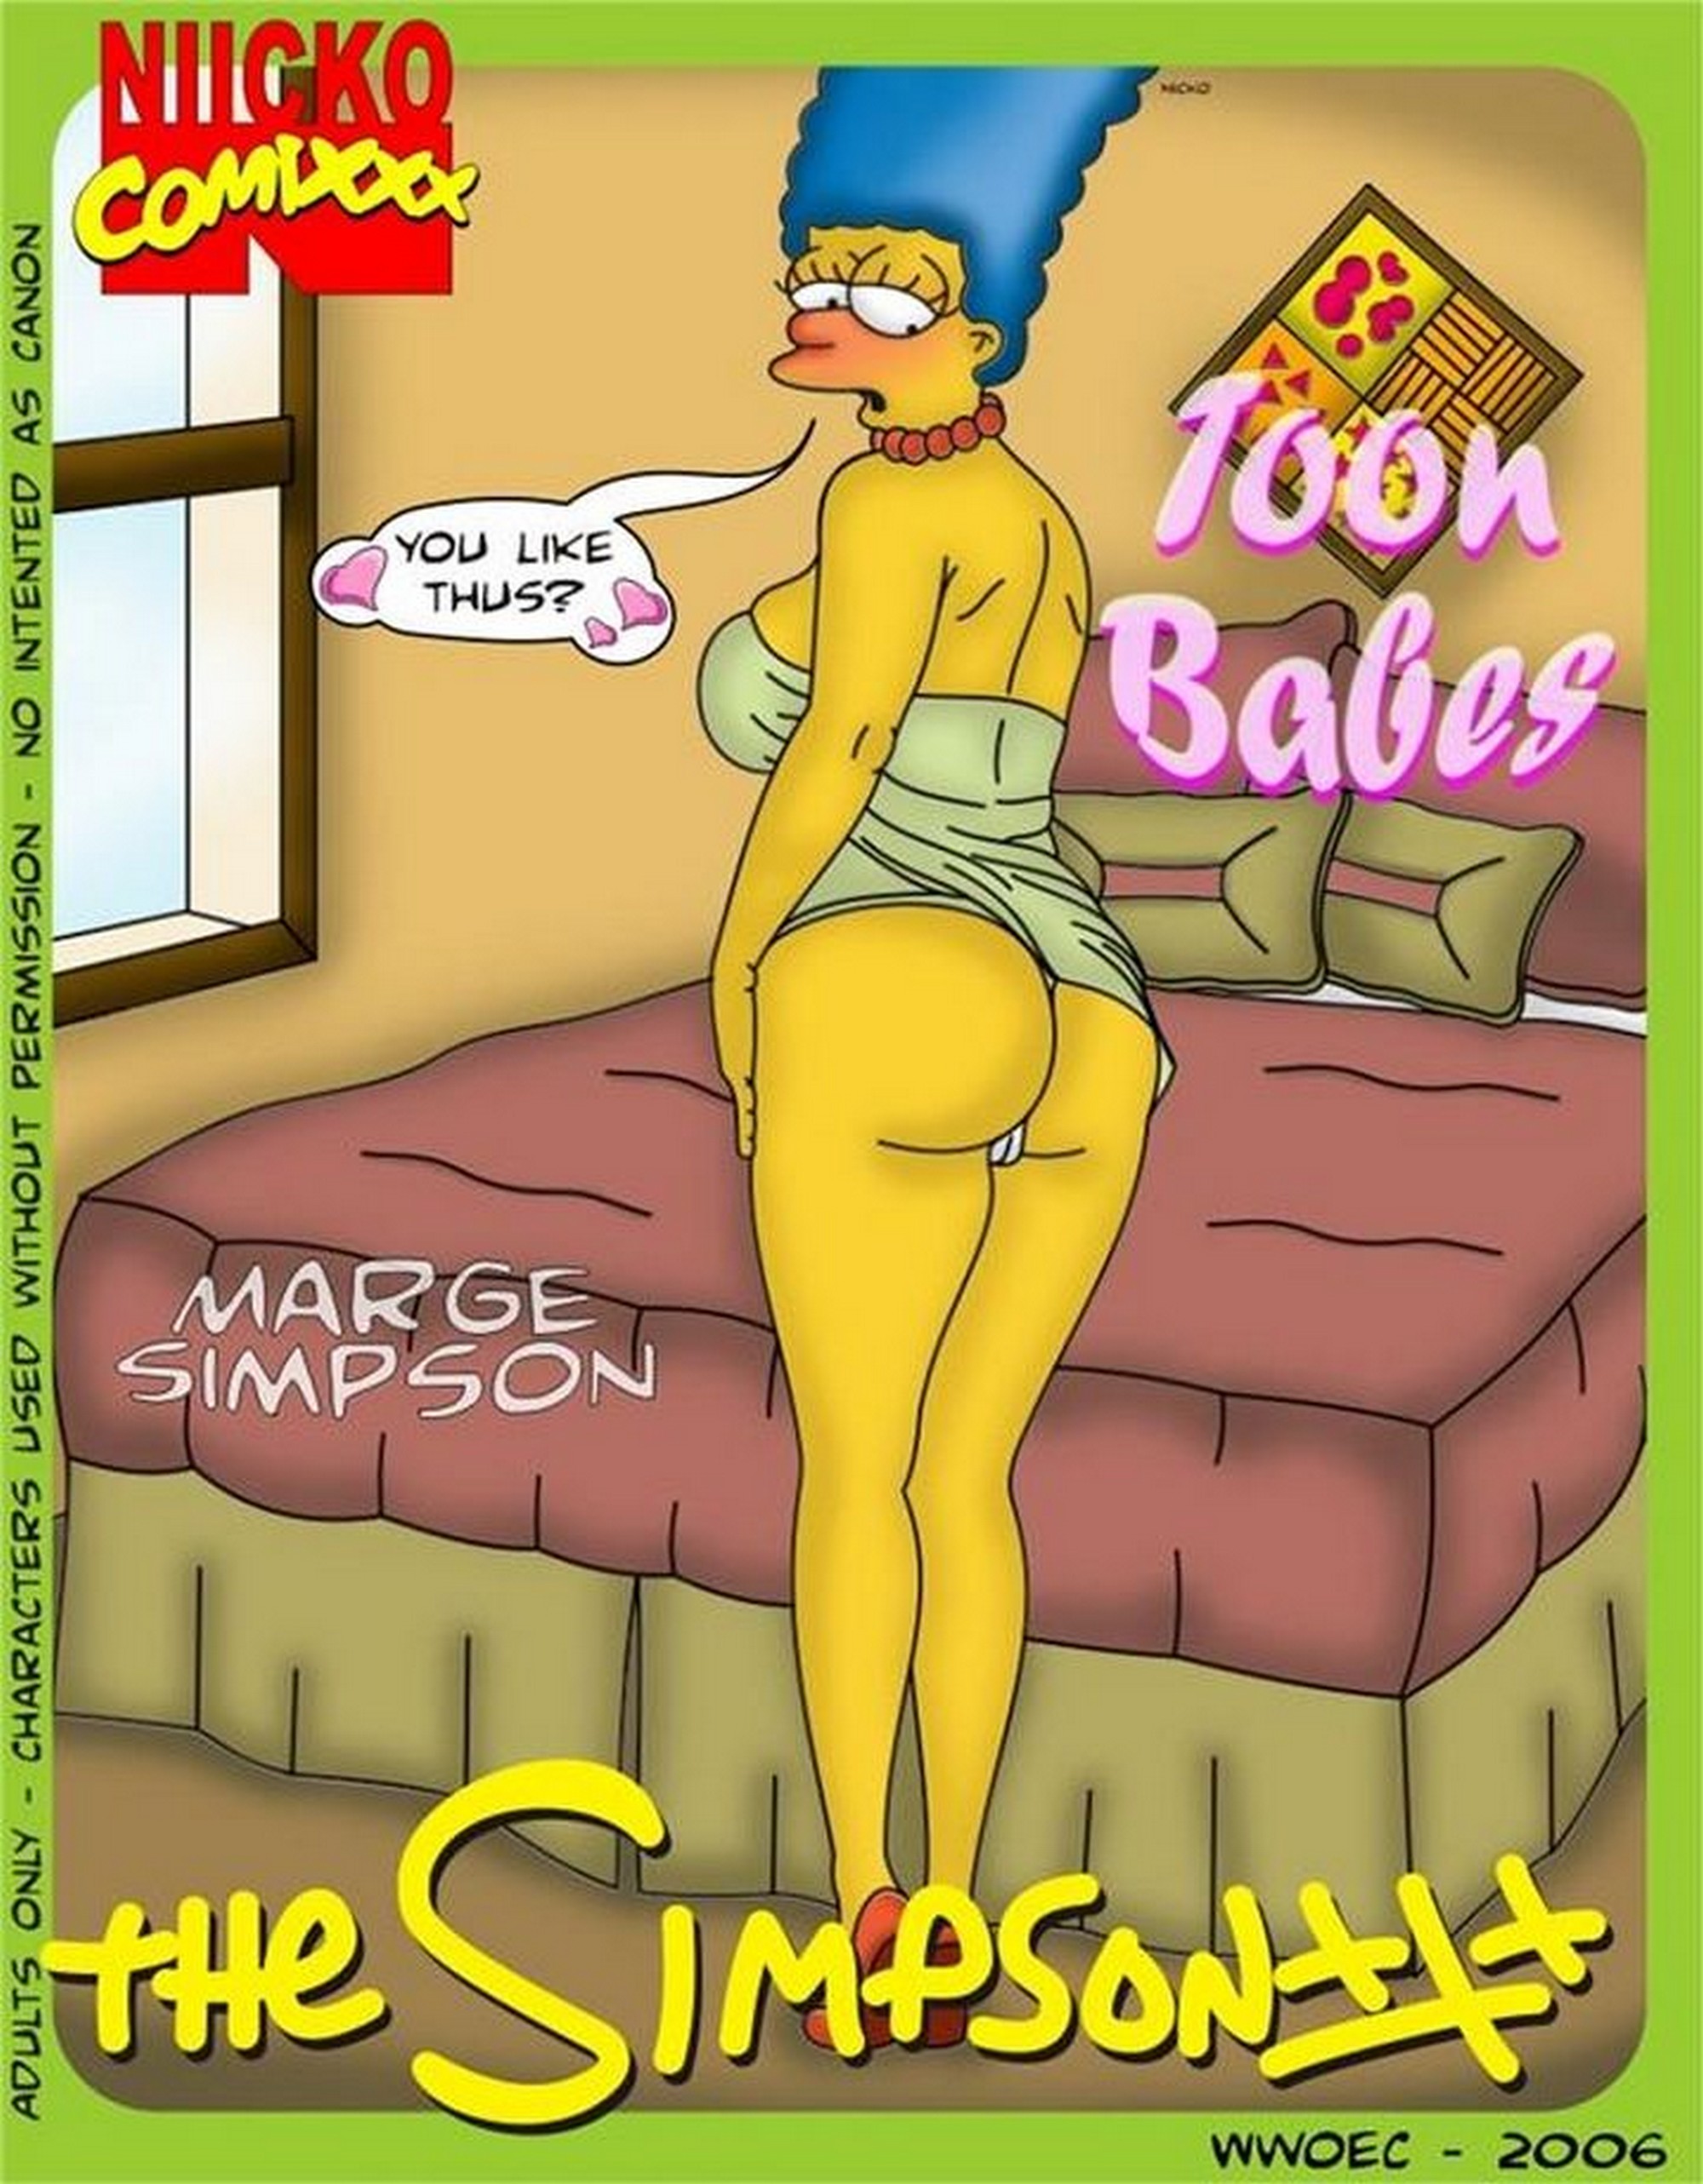 Marge Simpson - Toon Babes